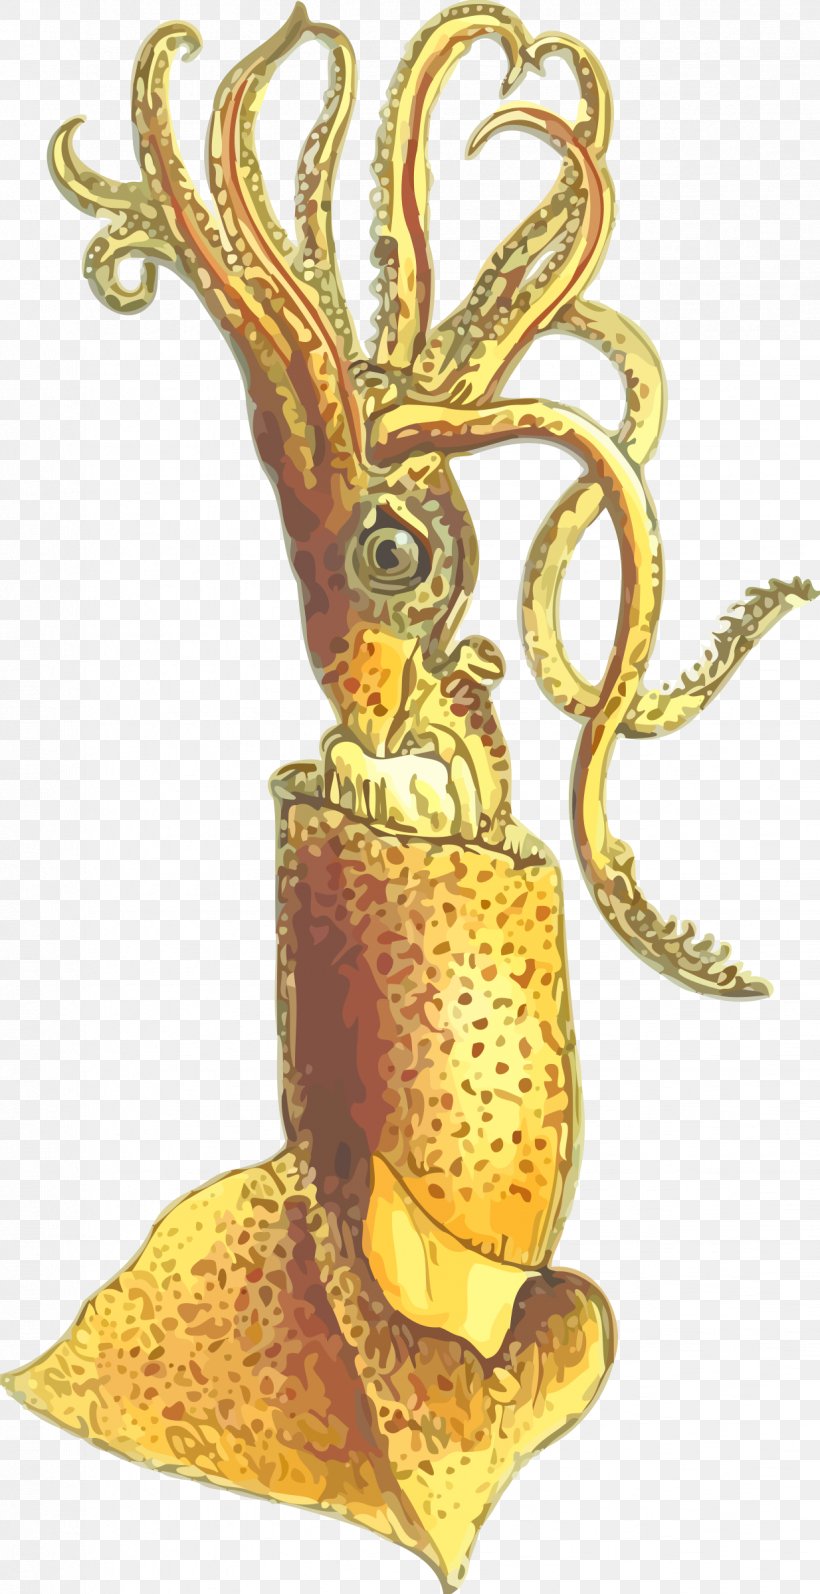 Squid Cephalopod Clip Art, PNG, 1234x2400px, Squid, Cephalopod, Gold, Molluscs Download Free